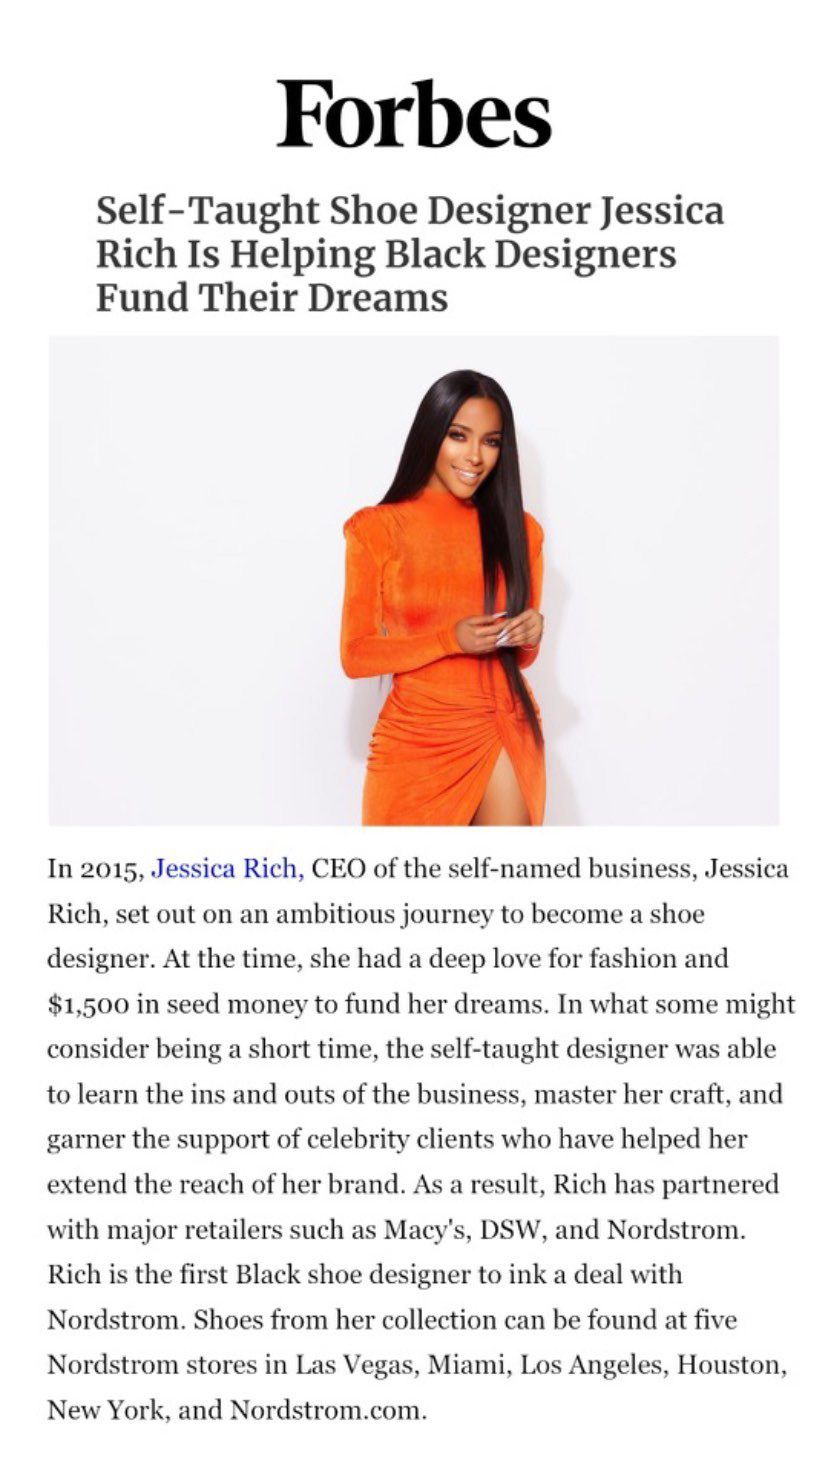 JESSICA RICH FEATURED IN FORBES